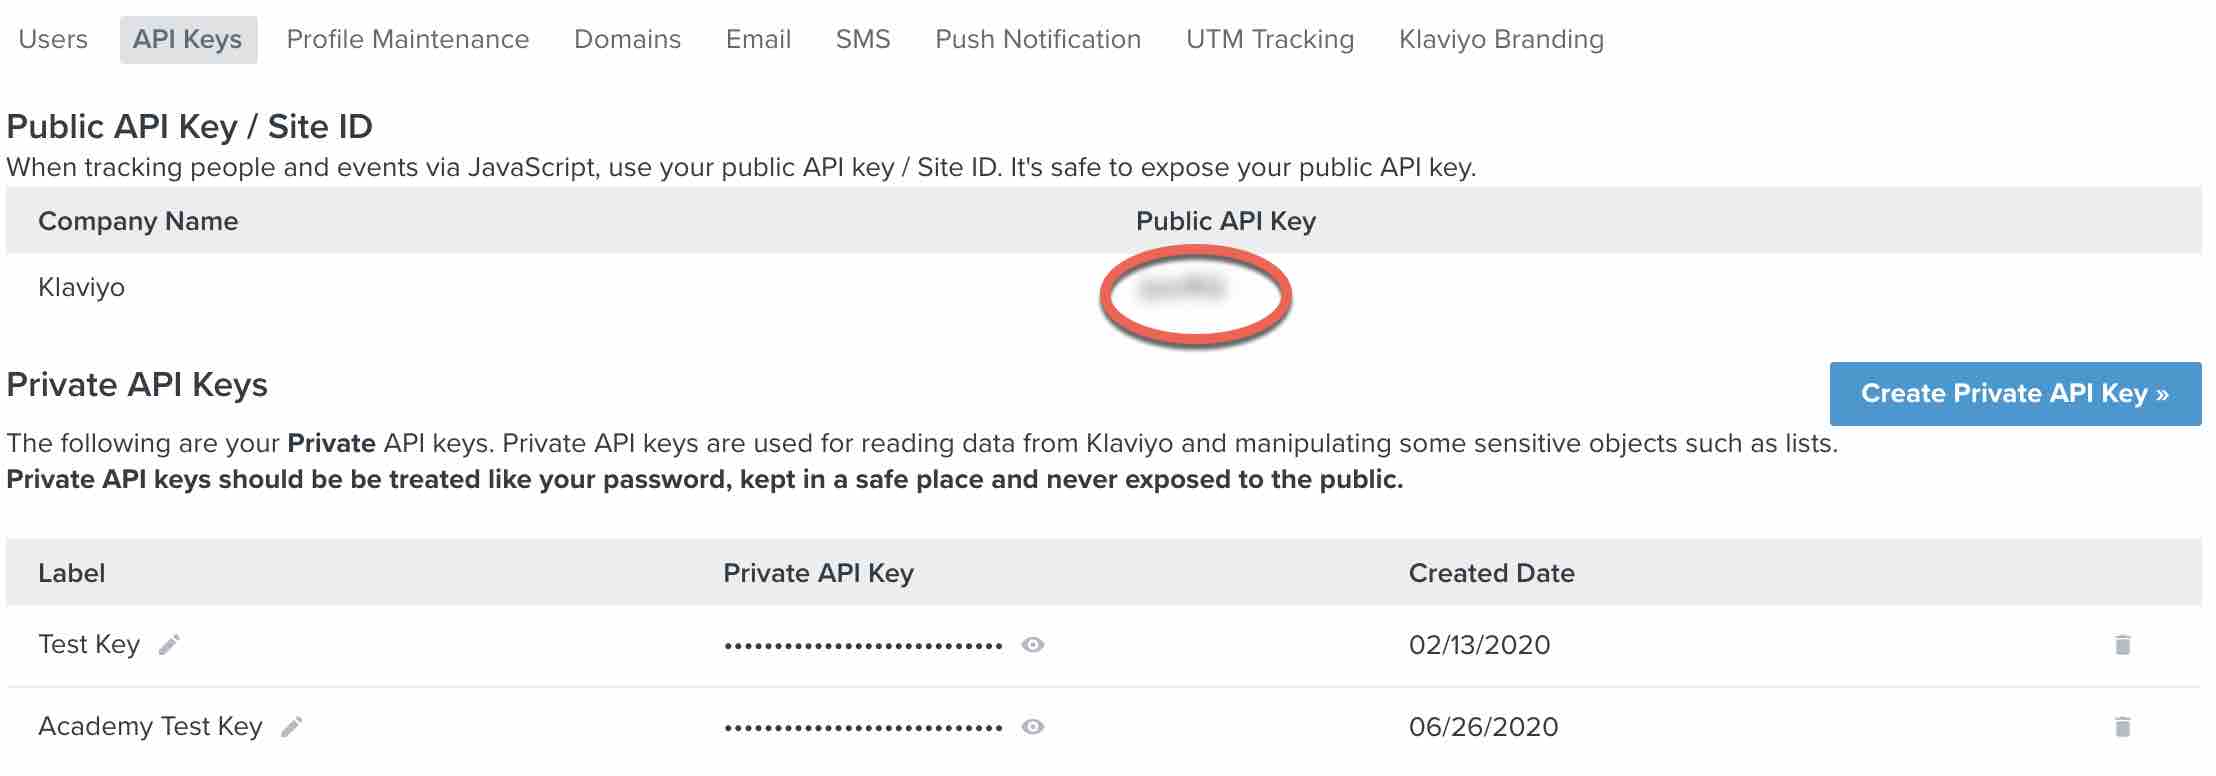 Klaviyo’s API Keys page with Create Private API Key in a blue button and Public API Key circled in red